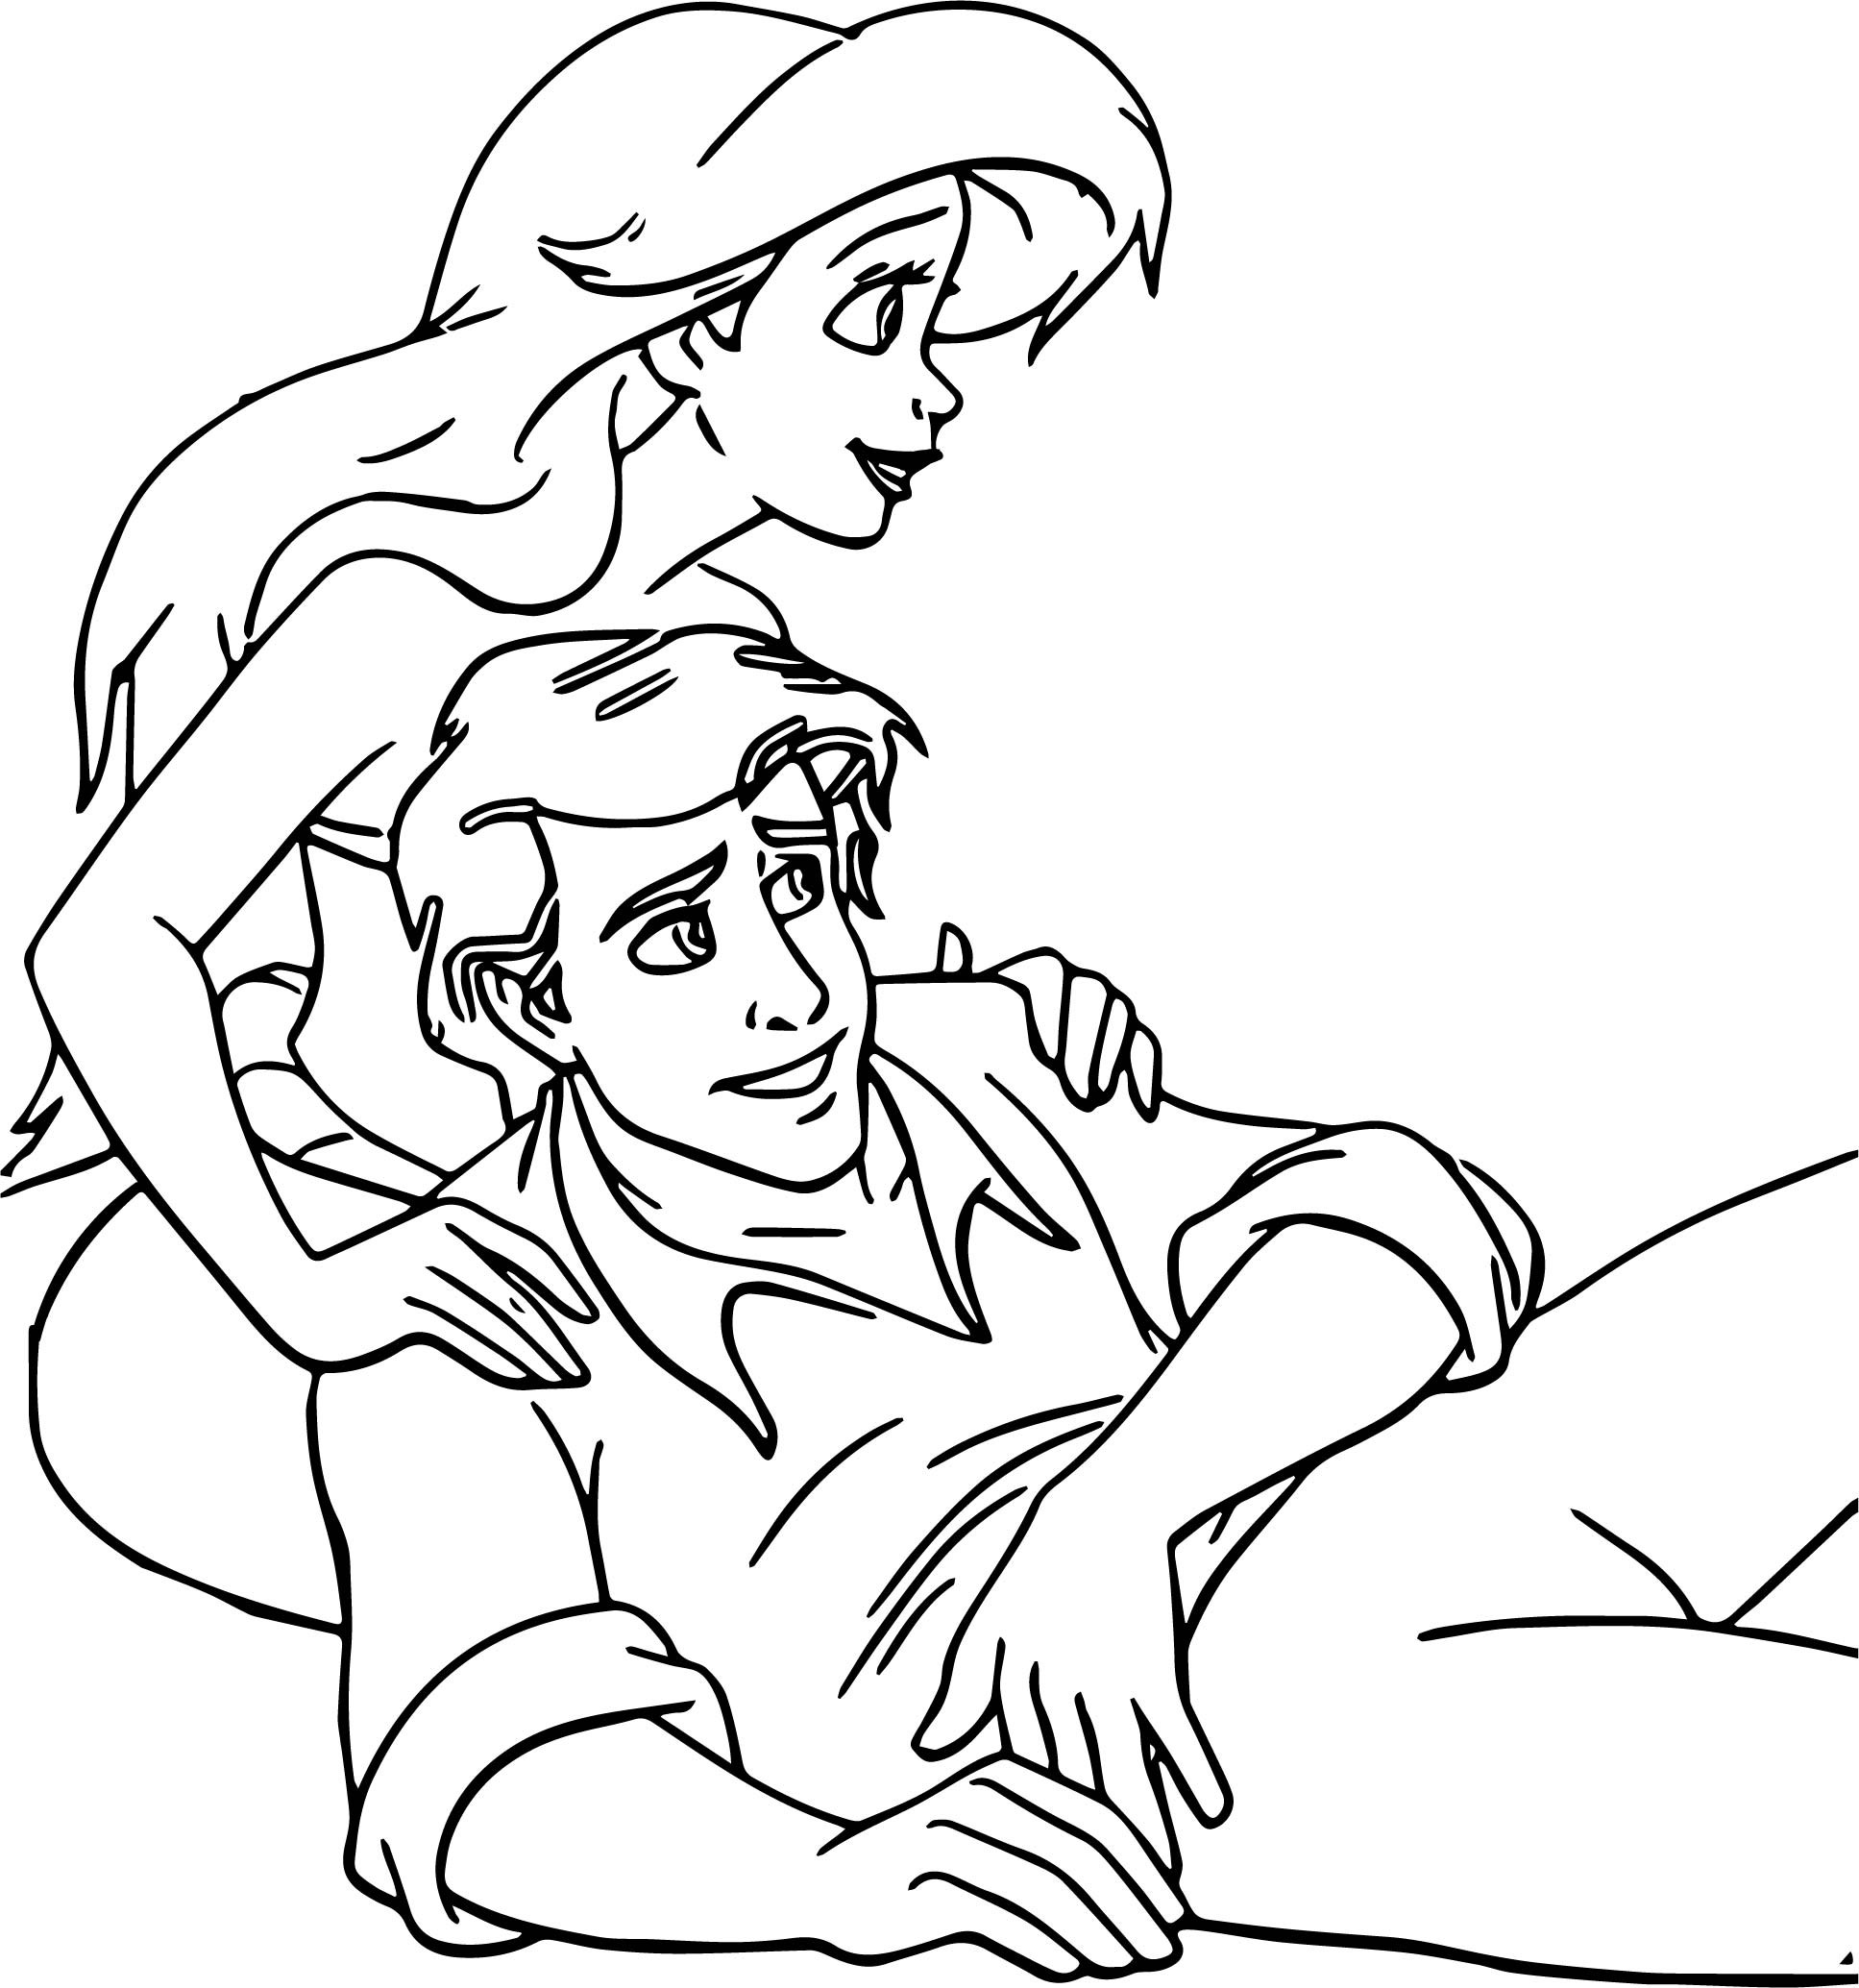 Girlfriend And Boyfriend Coloring Pages
 Disney The Little Mermaid Return To The Sea Boyfriend